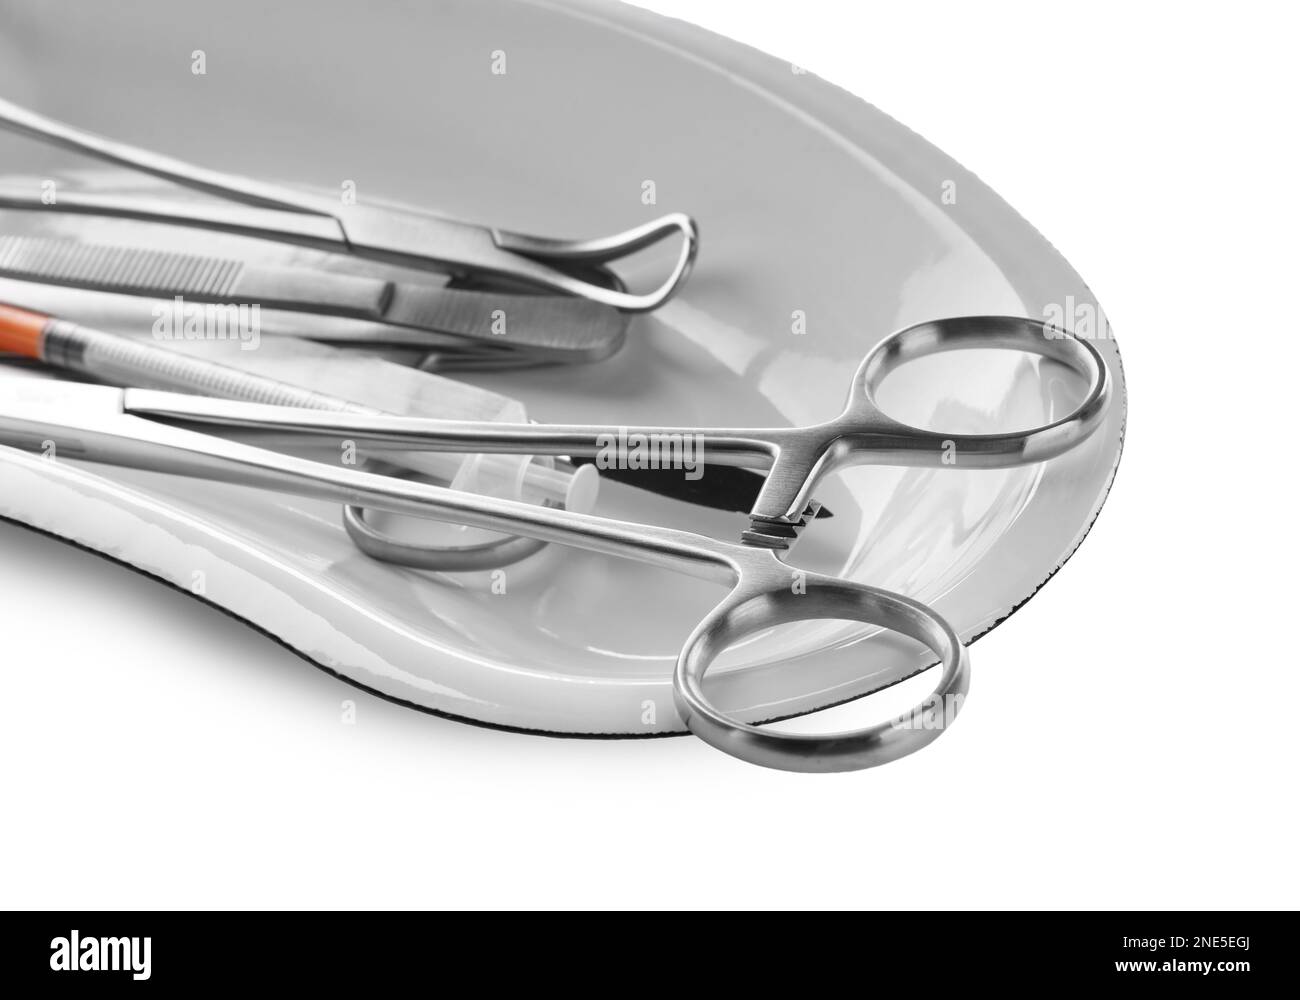 Surgical instruments in kidney dish on white background, closeup Stock Photo